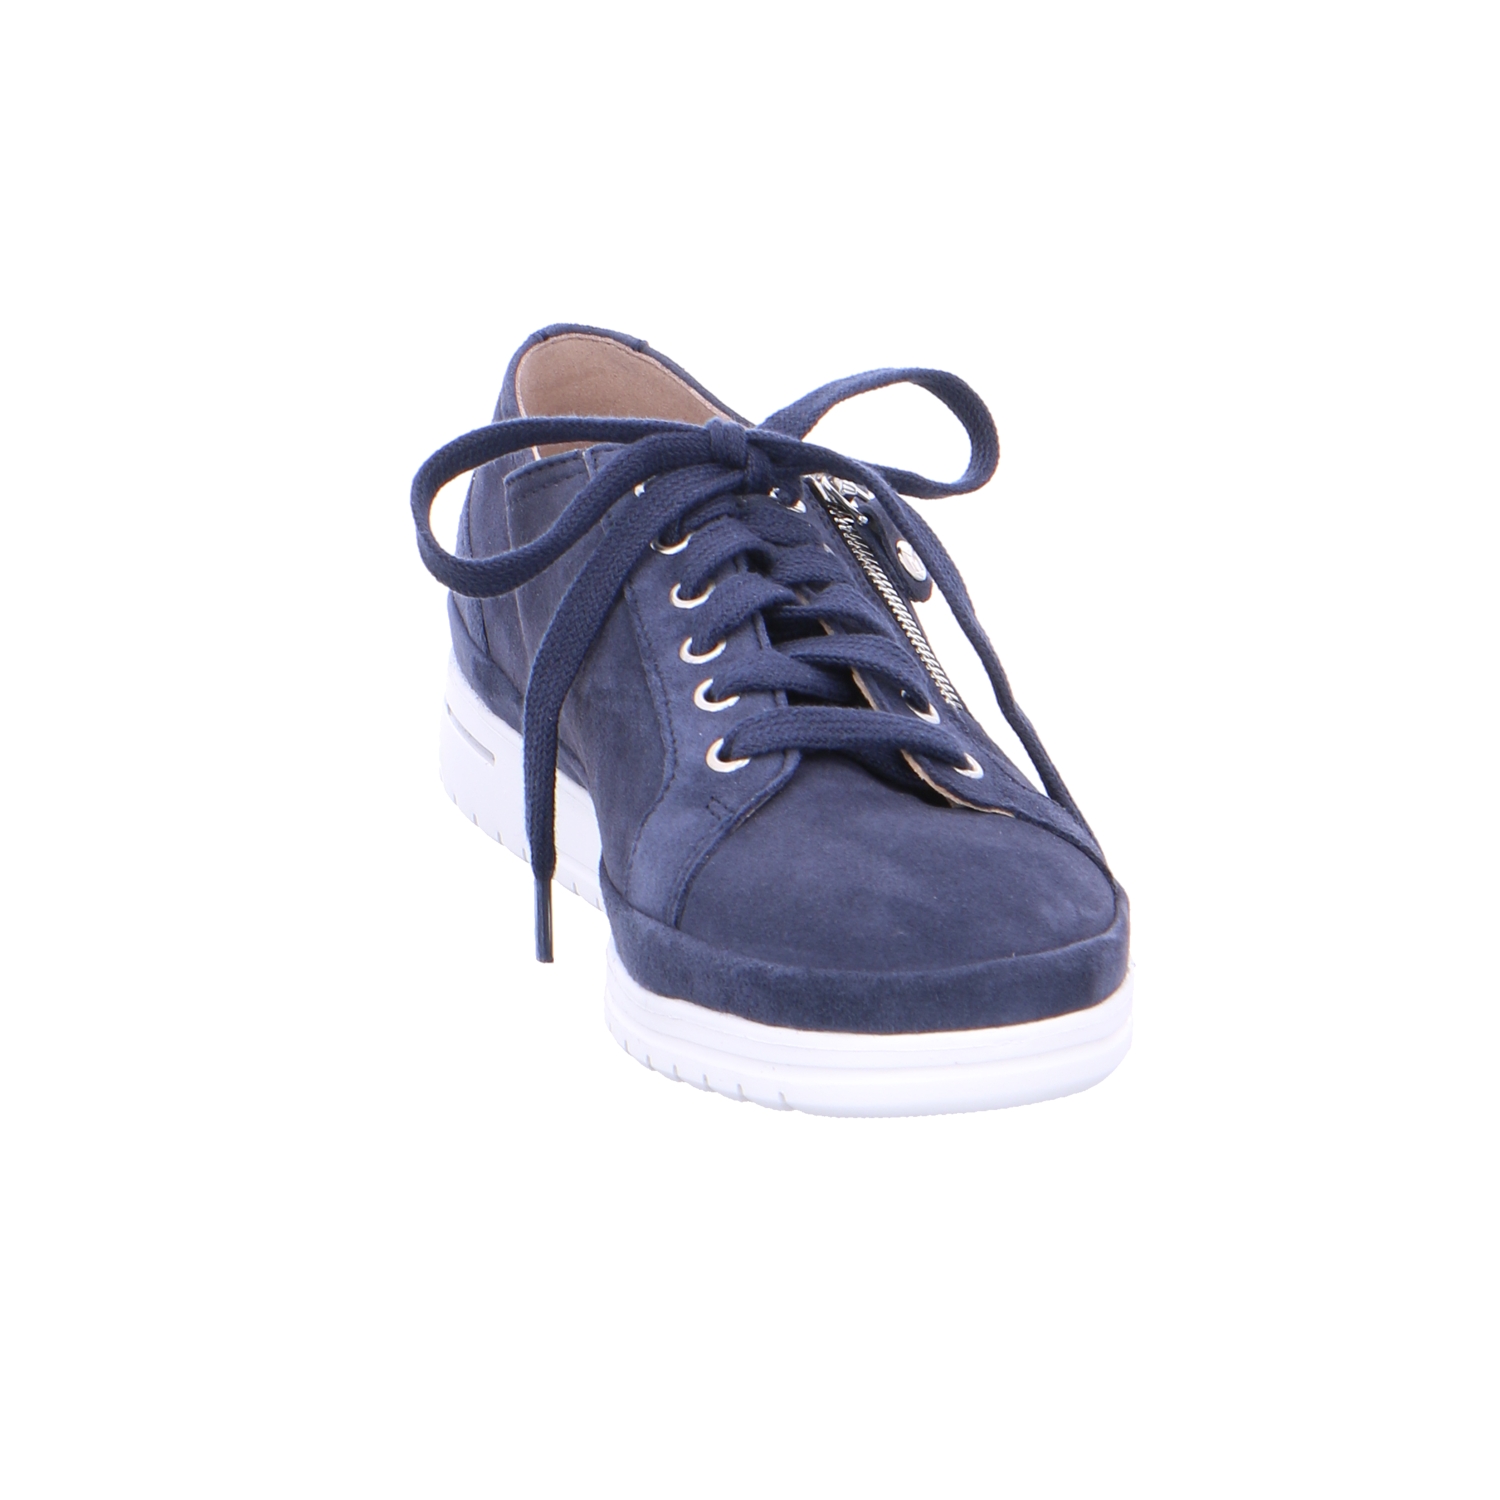 Mephisto June Blue suede leather